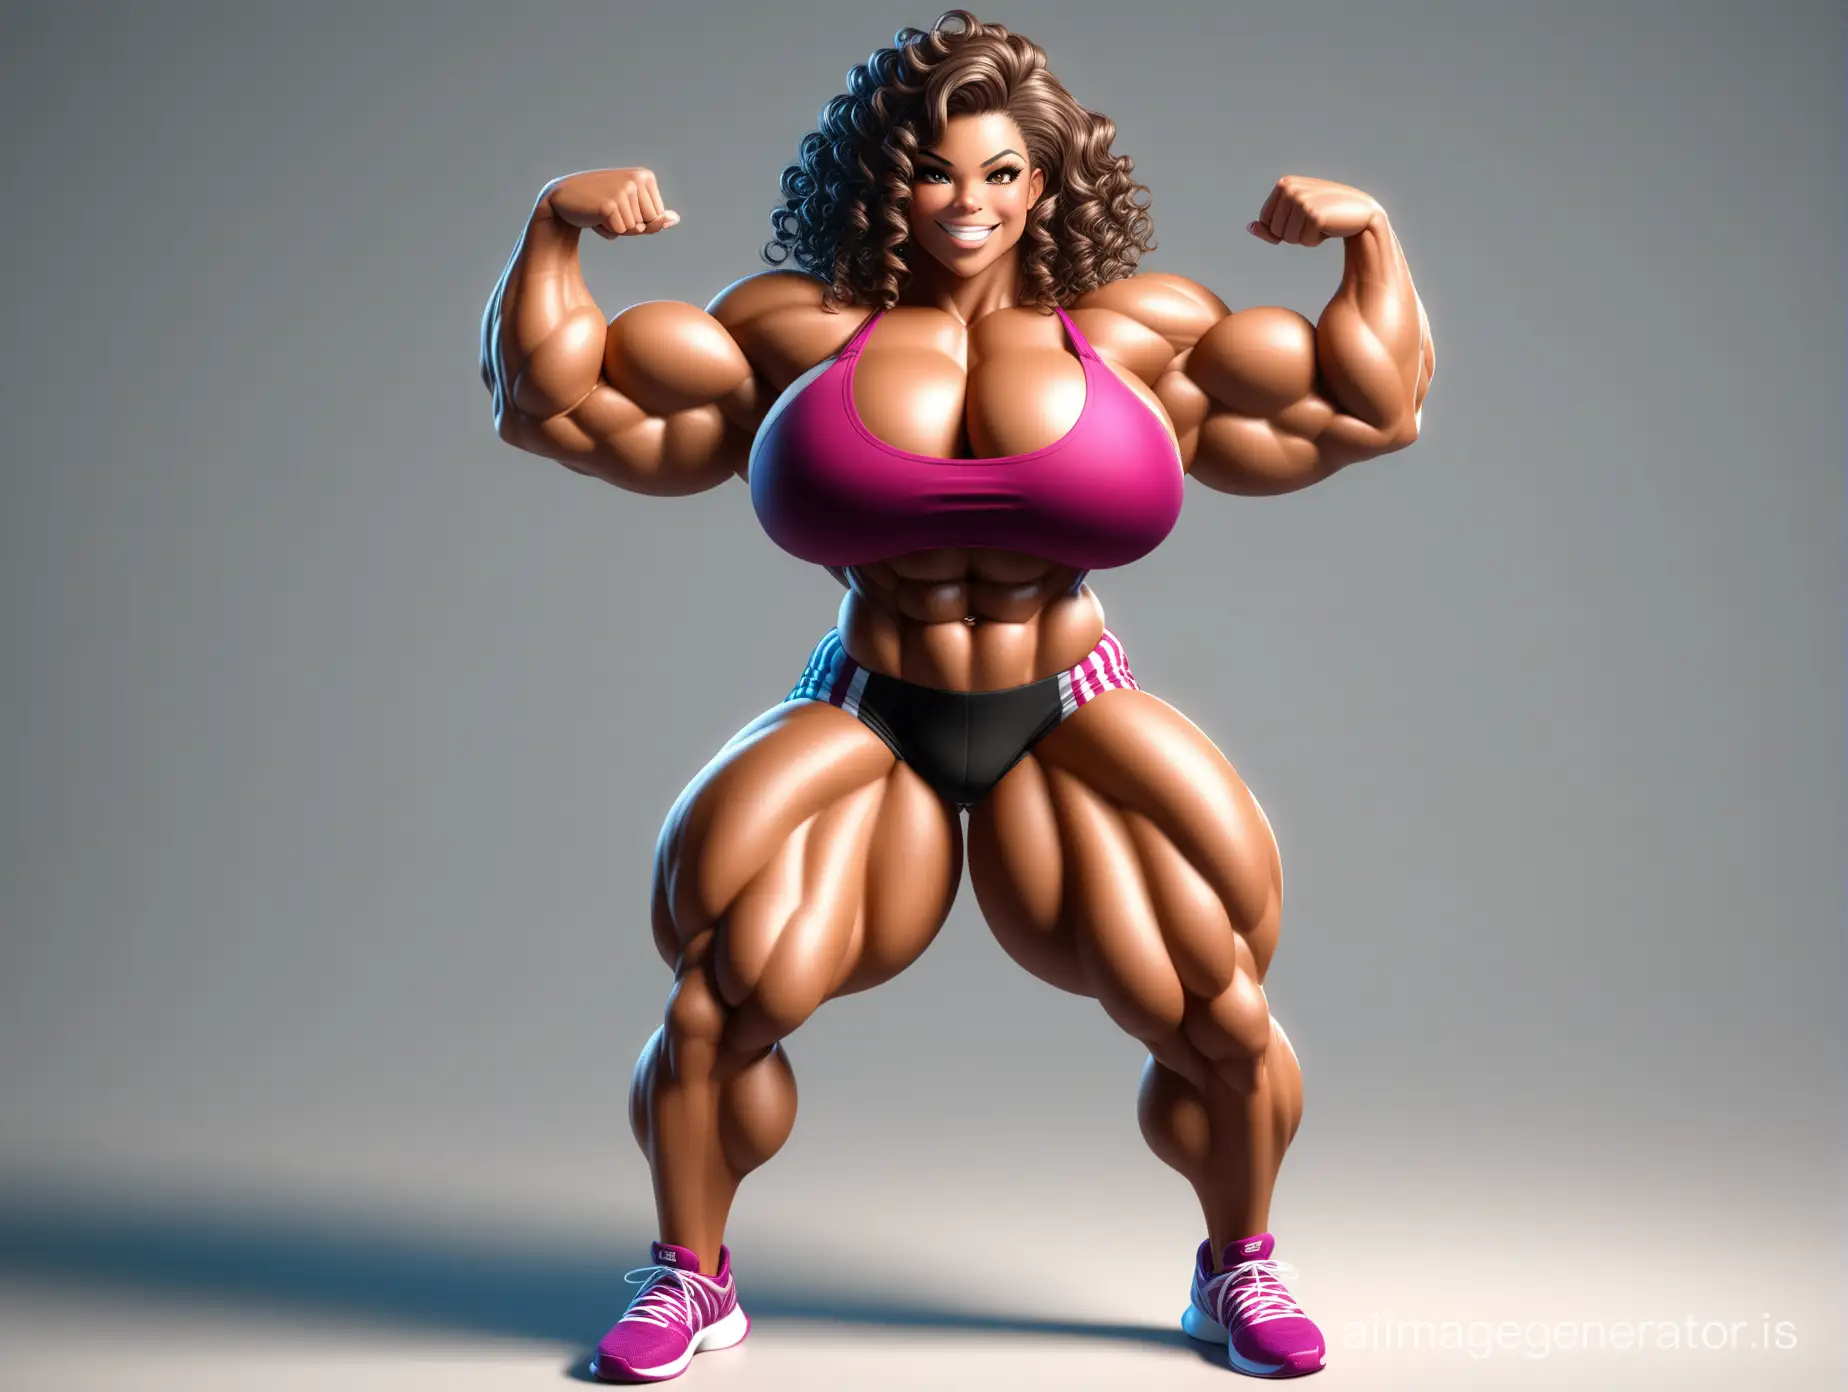 muscle female babe calves delts extremely ripped body abs thick legs tanned skin wear tight sport shorts thick arms curly hair crazy smile big boobs 3d render extremely big body
